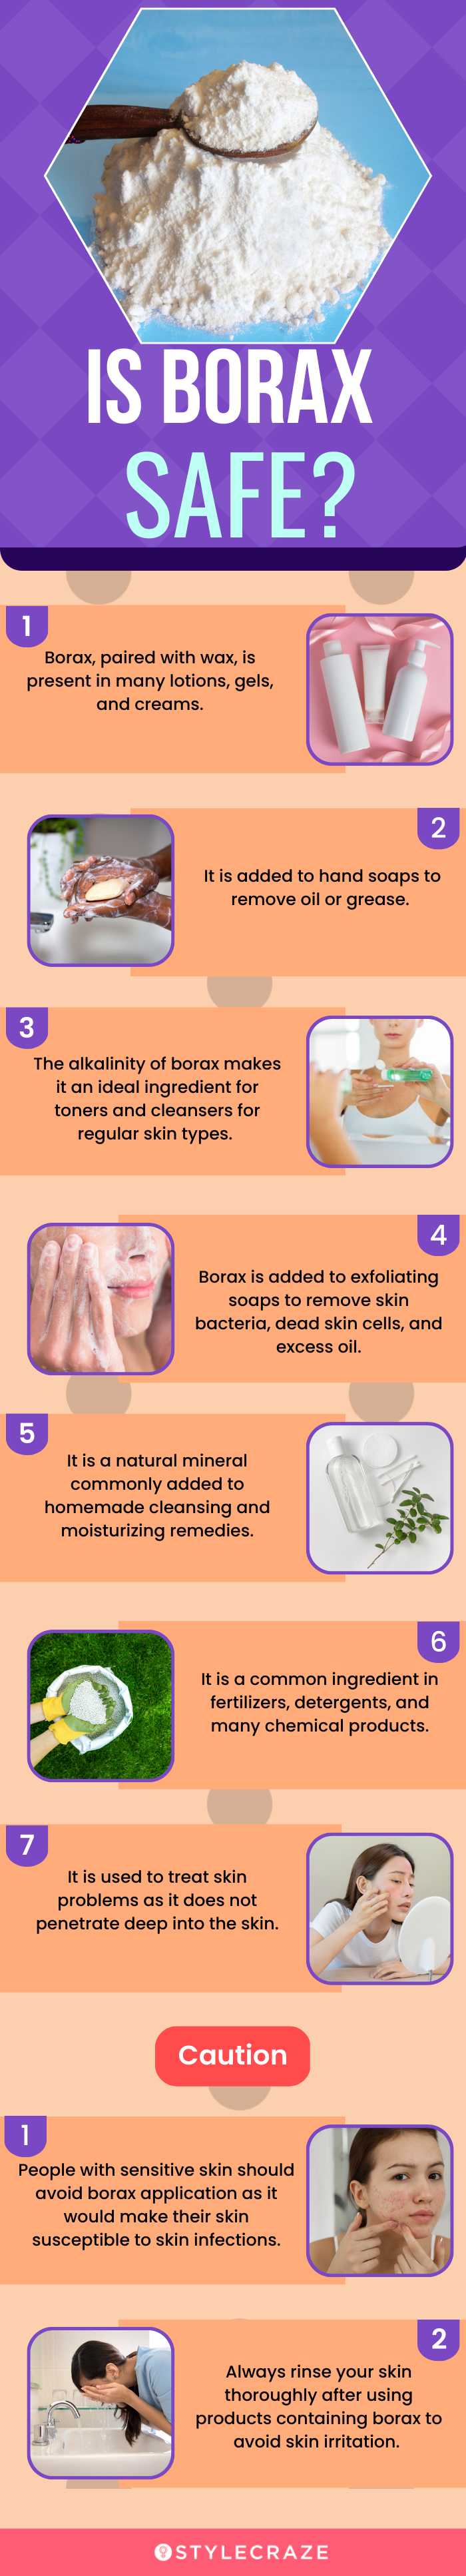 is borax safe (infographic)